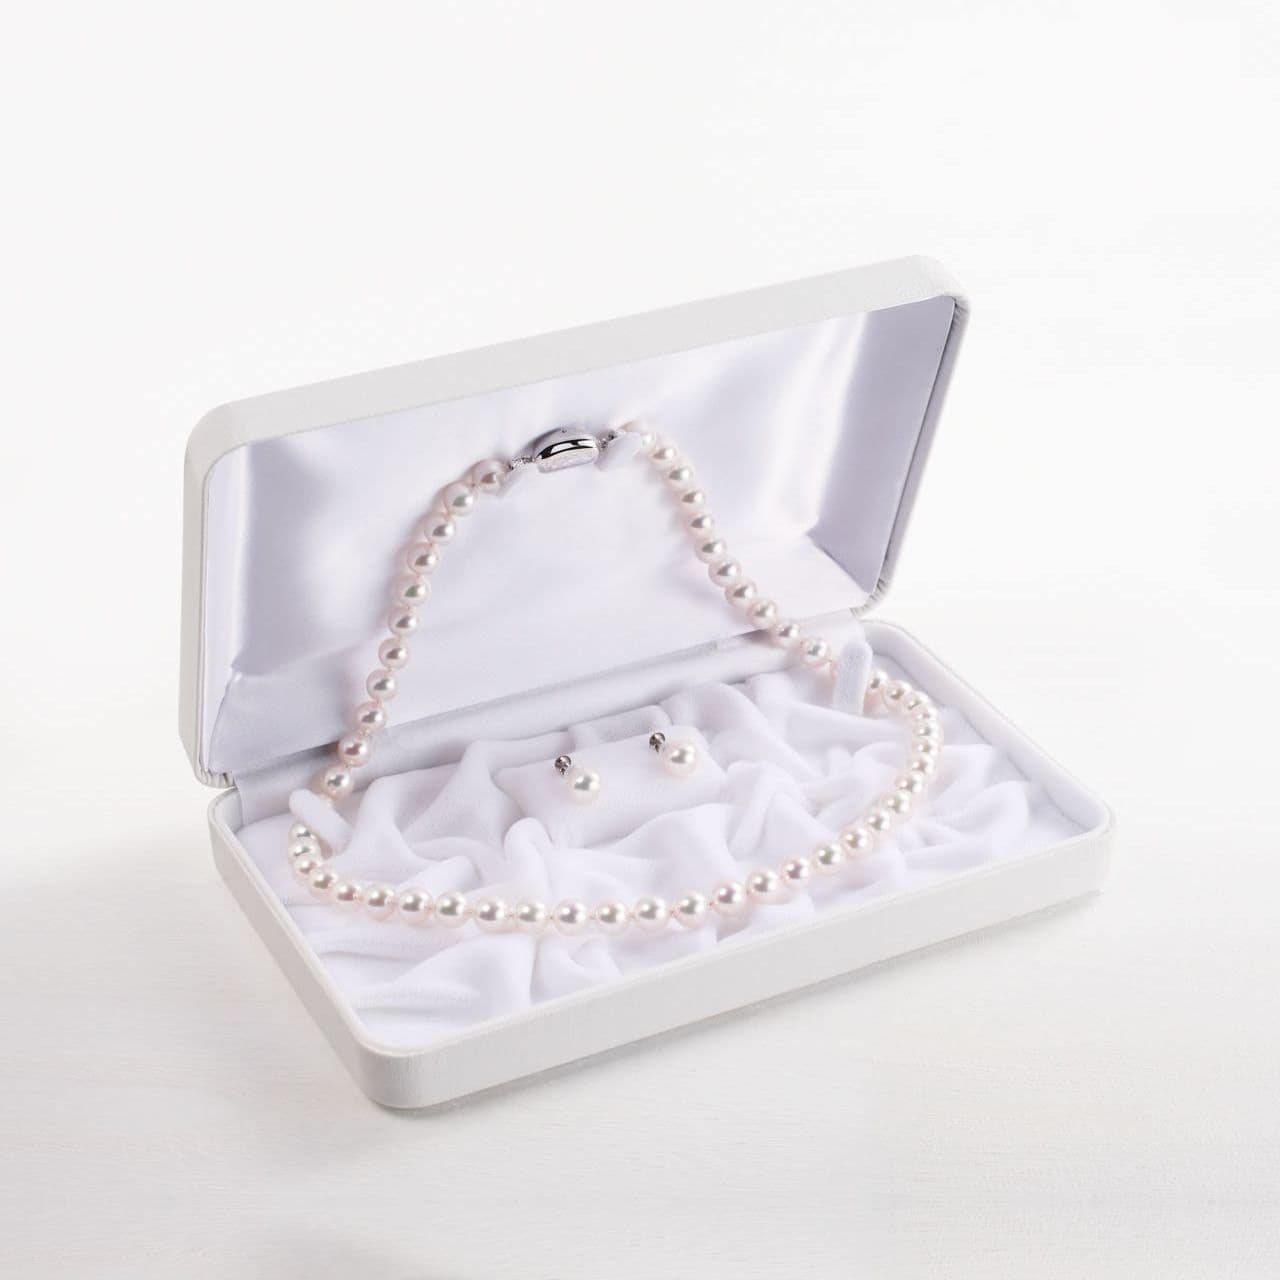 Akoya pearl necklace & pearl earrings set【S】/アコヤ真珠ネックレス＆イヤリングセット Sサイズ-4